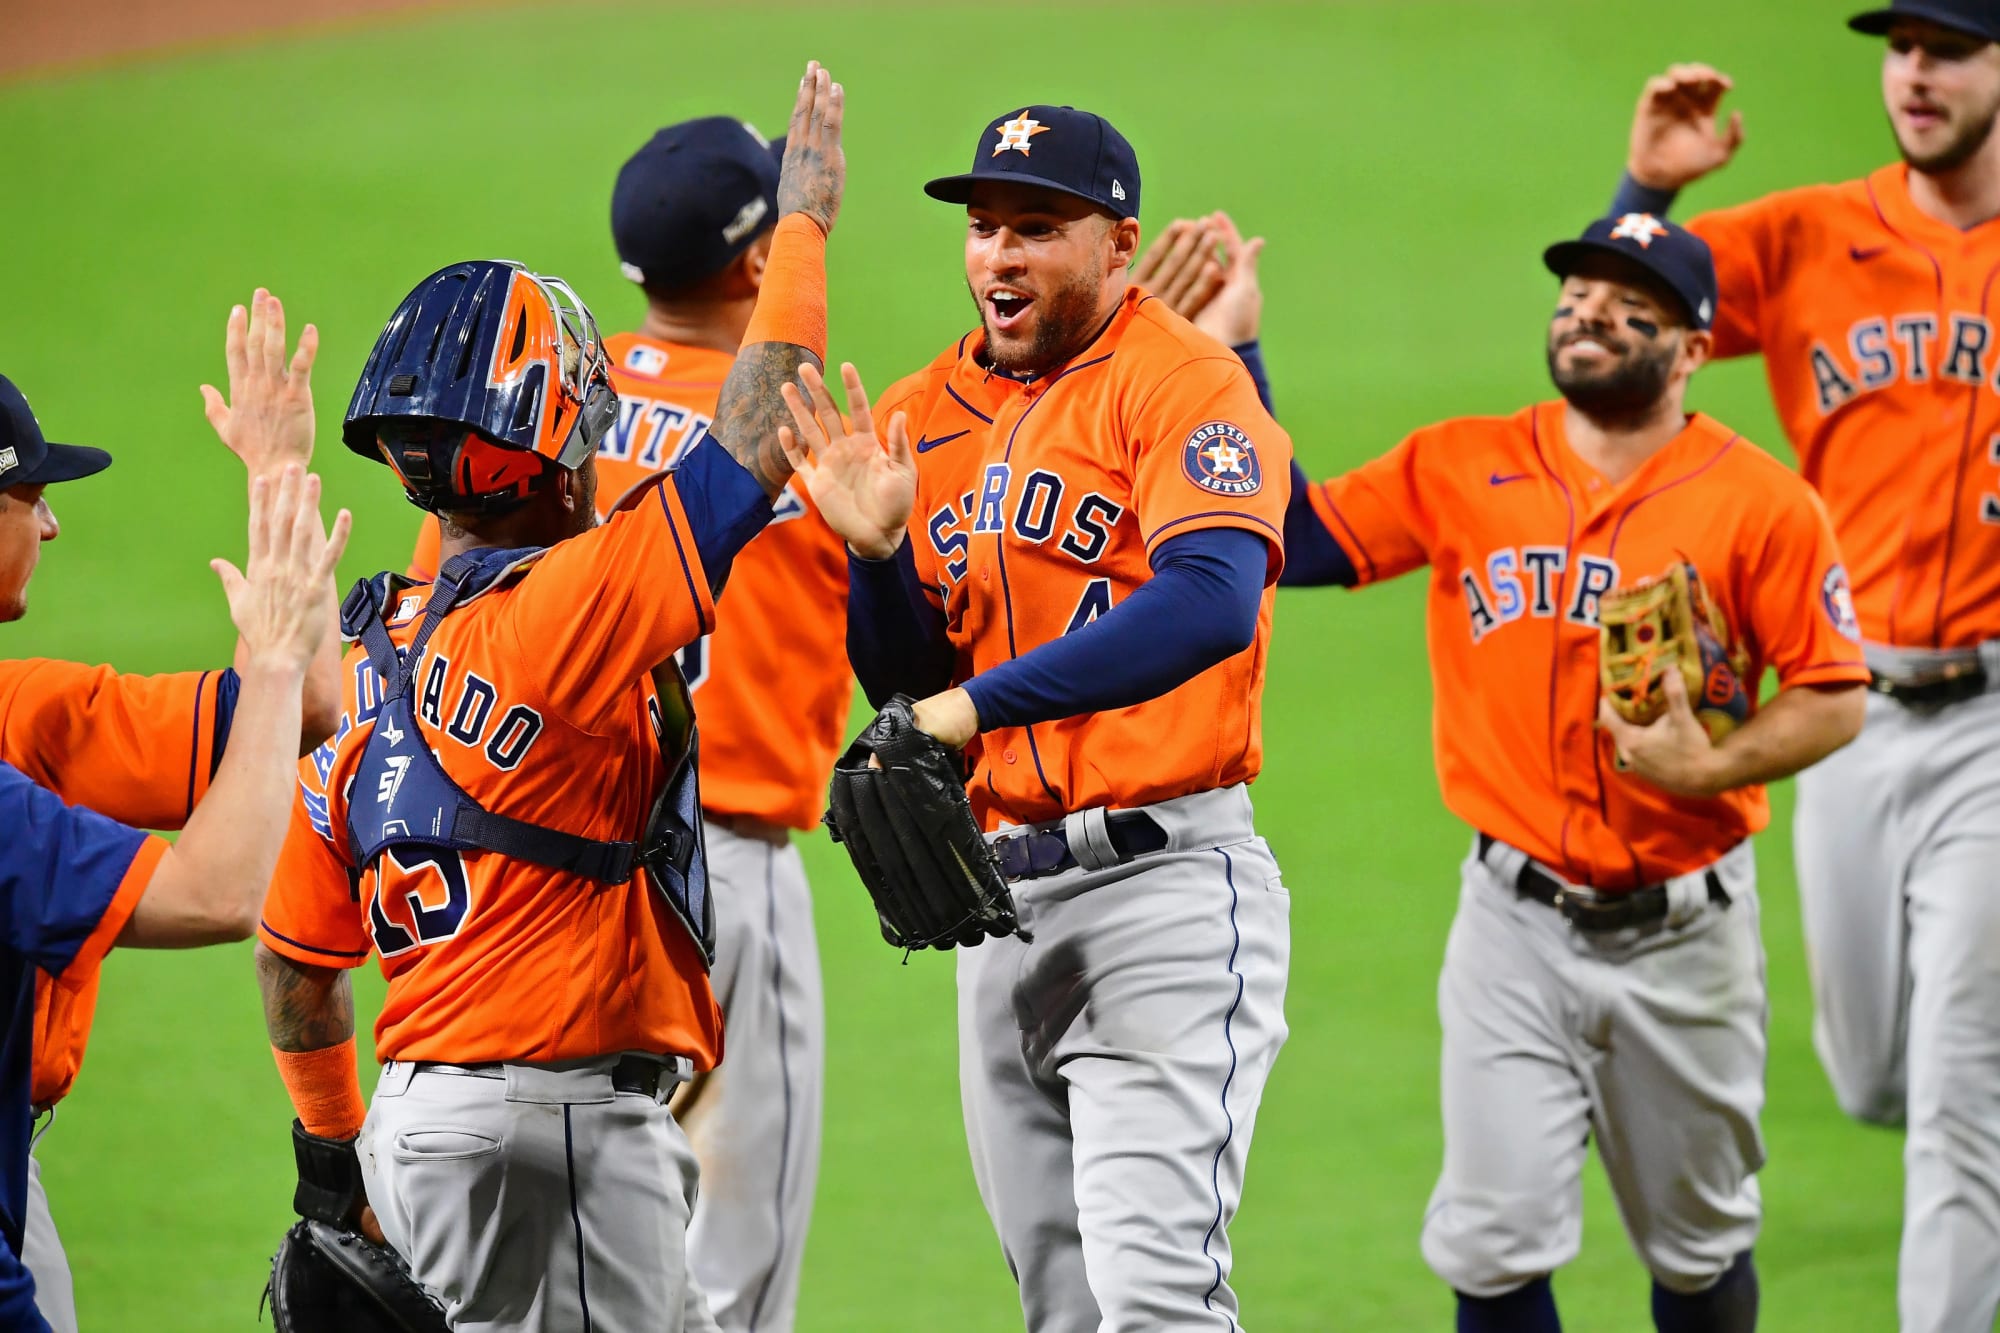 Astros proved their worth with entertaining playoff run